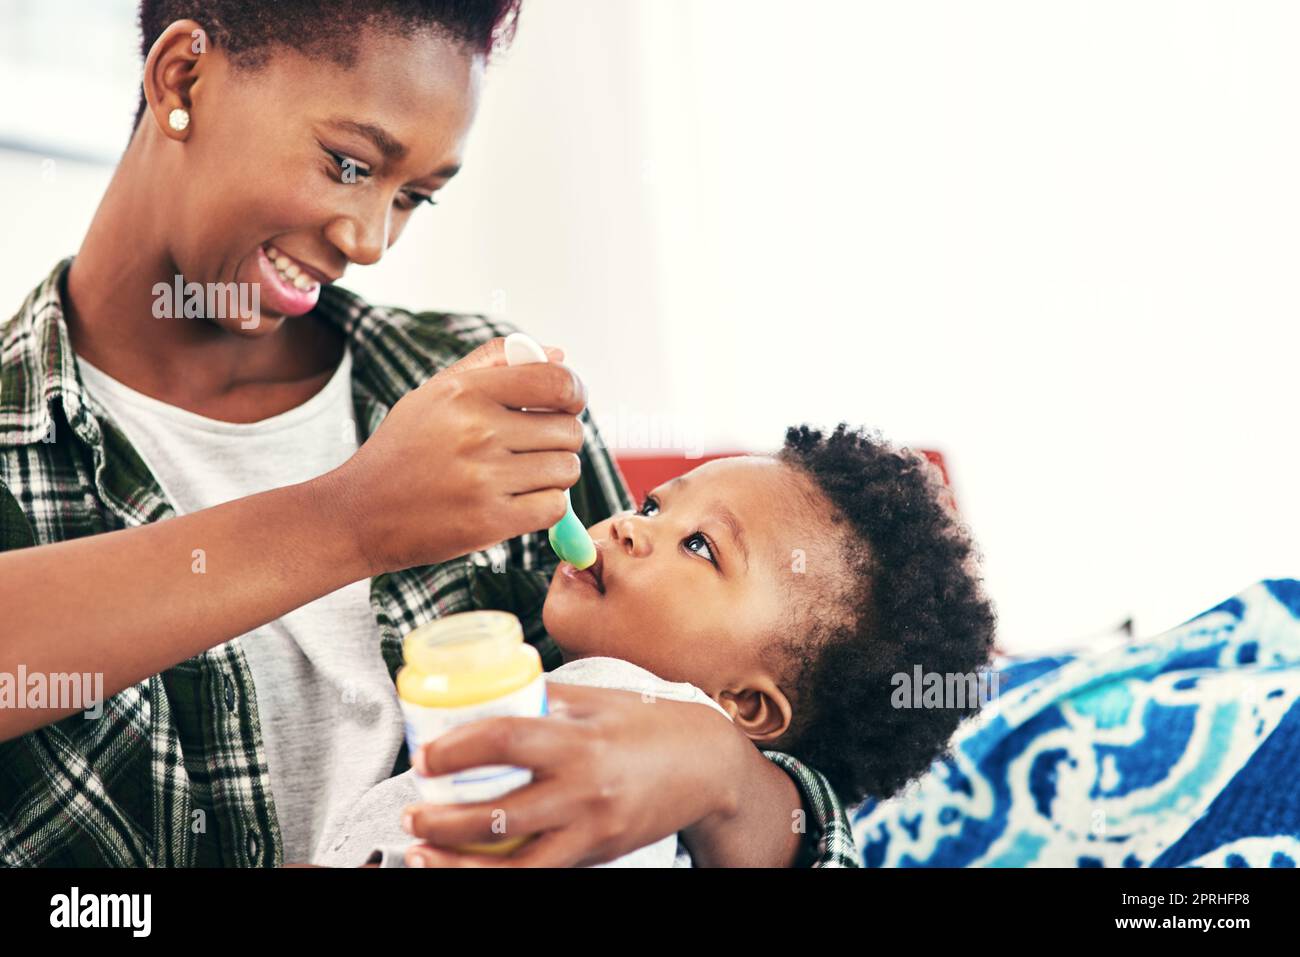 Words can not express the joy of new life. a mother feeding her little baby boy. Stock Photo